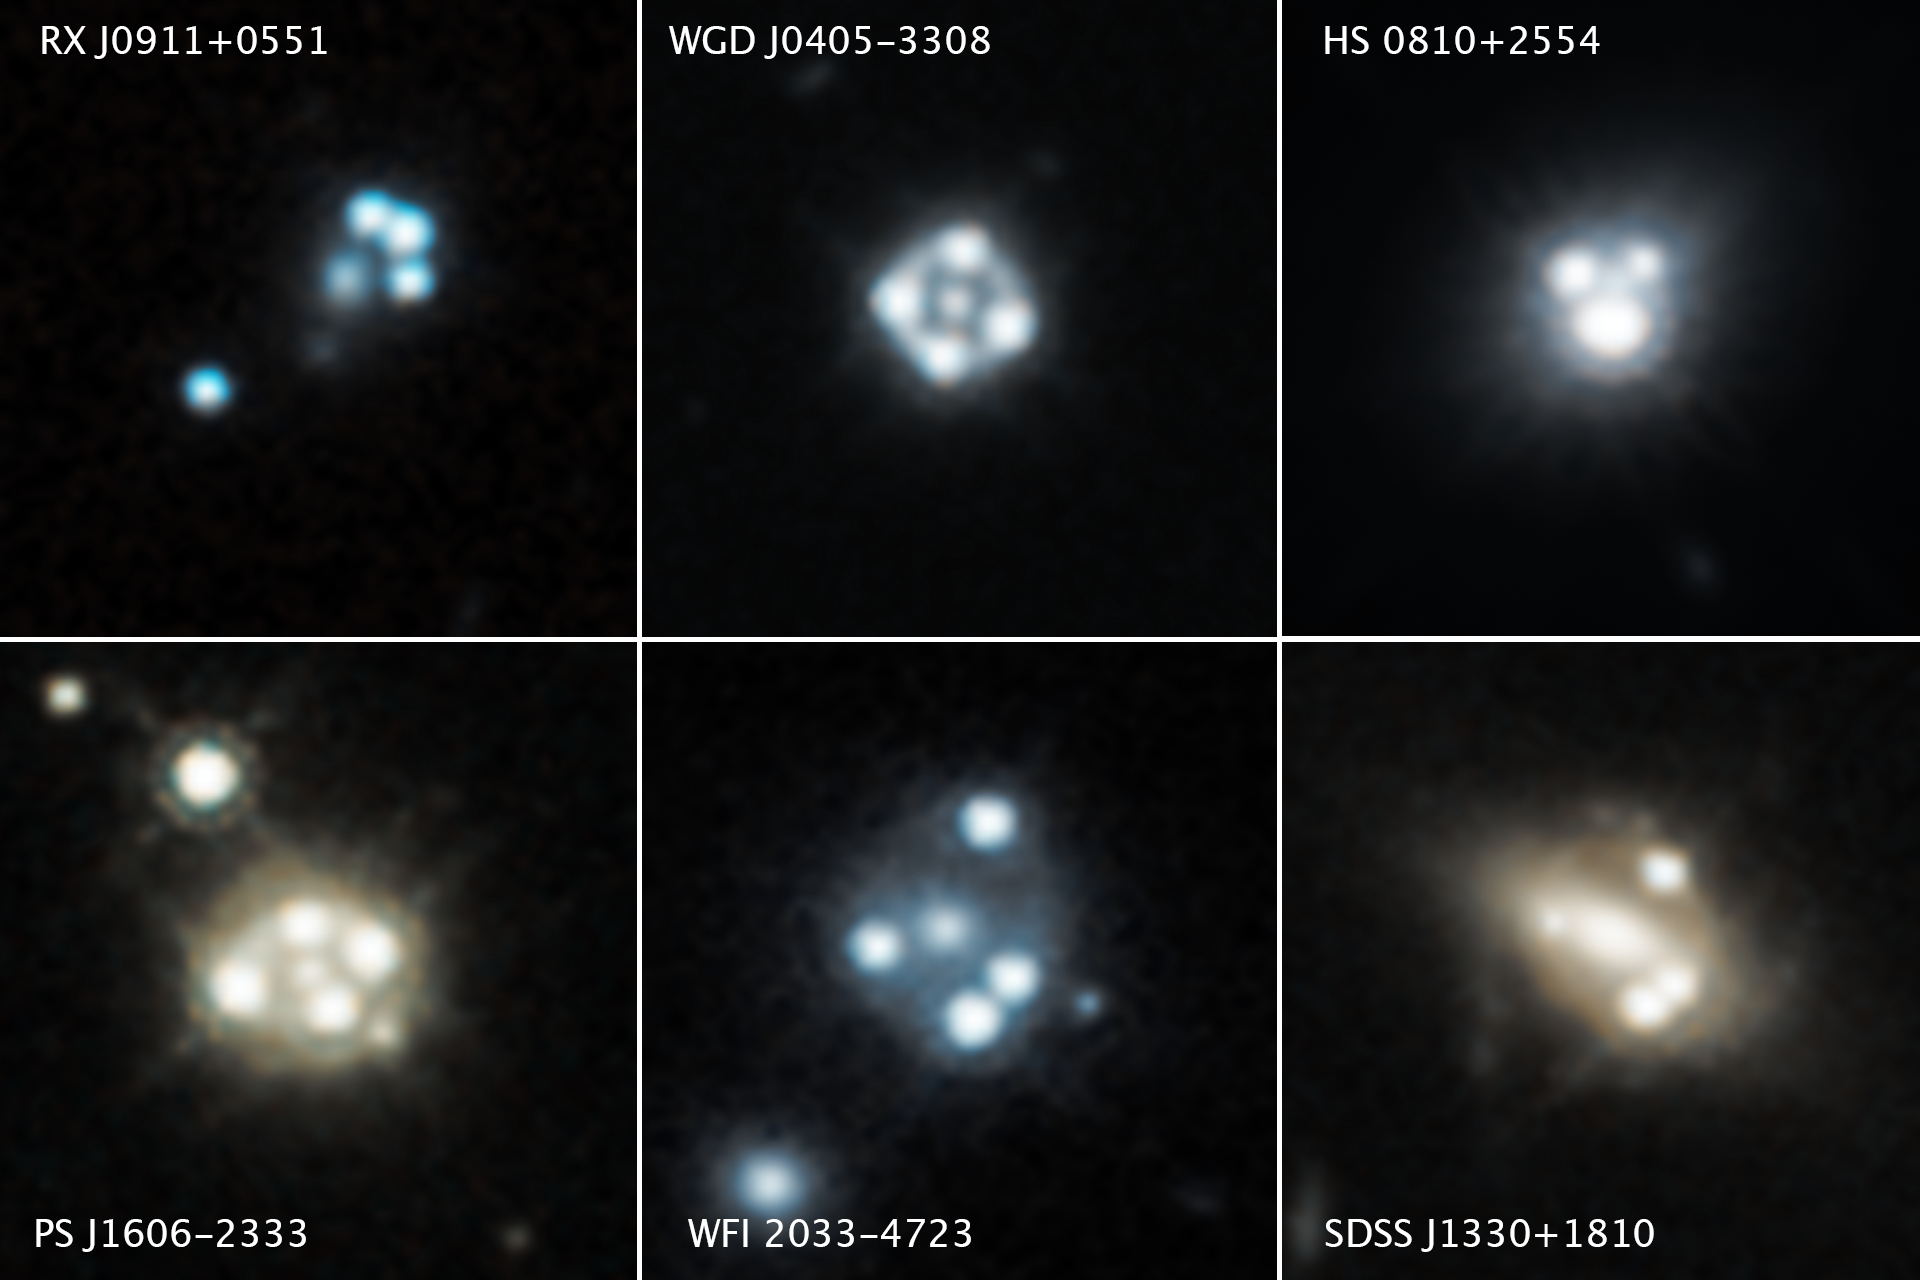 bright quasar "dots" against black backgrounds of space